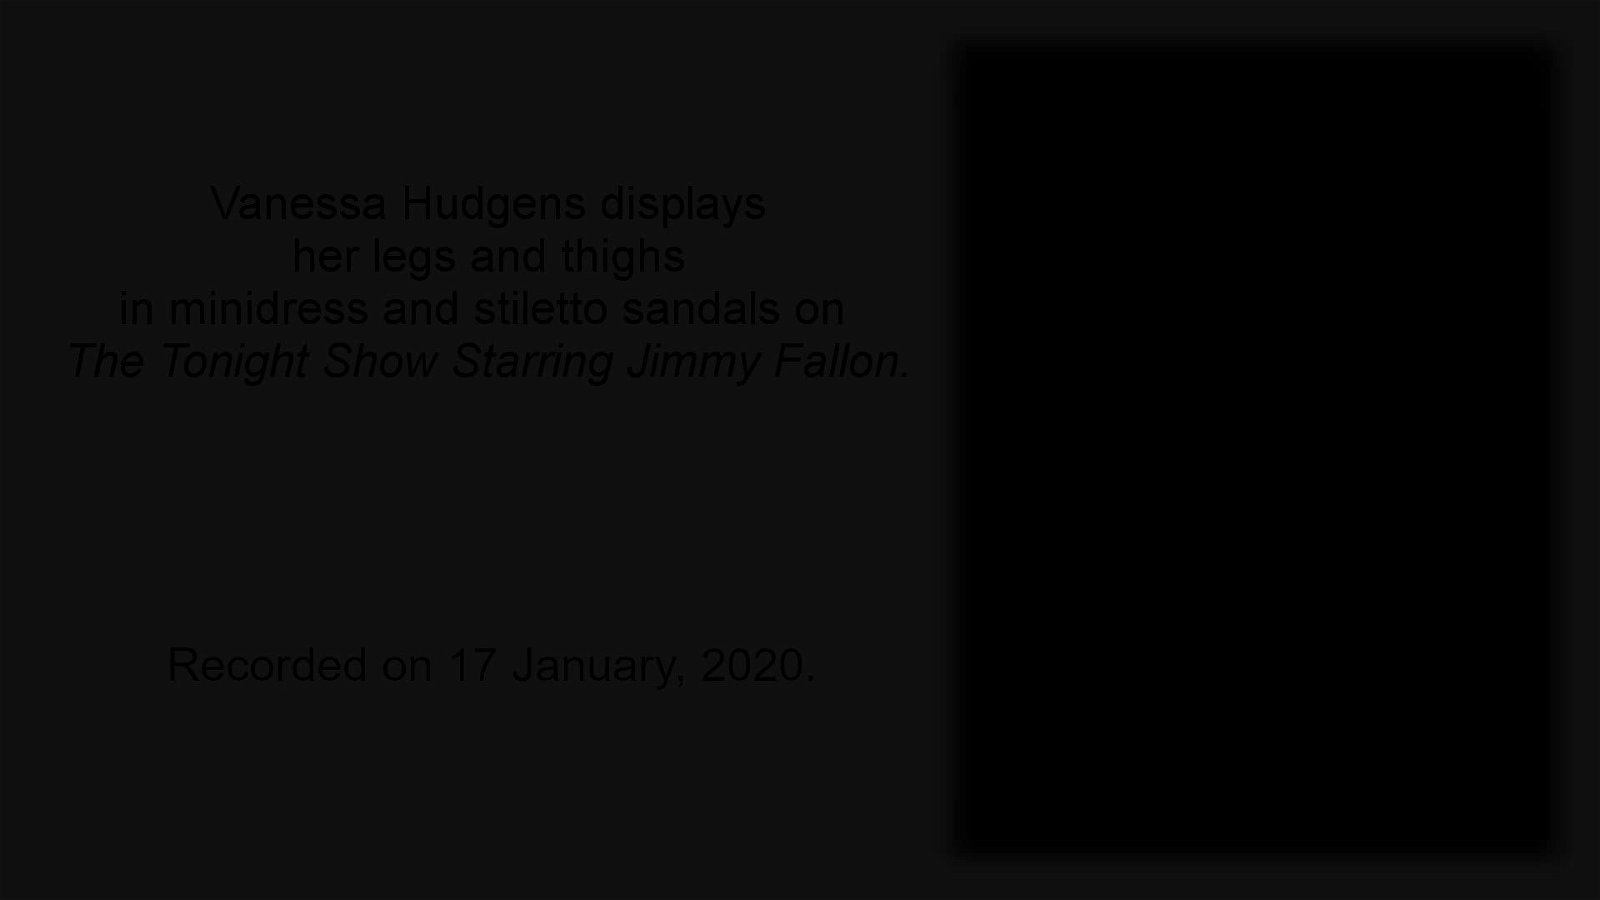 Watch the Video by tv.perception with the username @tv.perception, posted on April 5, 2023. The post is about the topic Celebrity Feet and Legs. and the text says 'Vanessa Hudgens displays her legs and thighs in minidress and stiletto sandals on "The Tonight Show Starring Jimmy Fallon."

Recorded on 17 January, 2020.

#VanessaHudgens #Celeb #Legs'